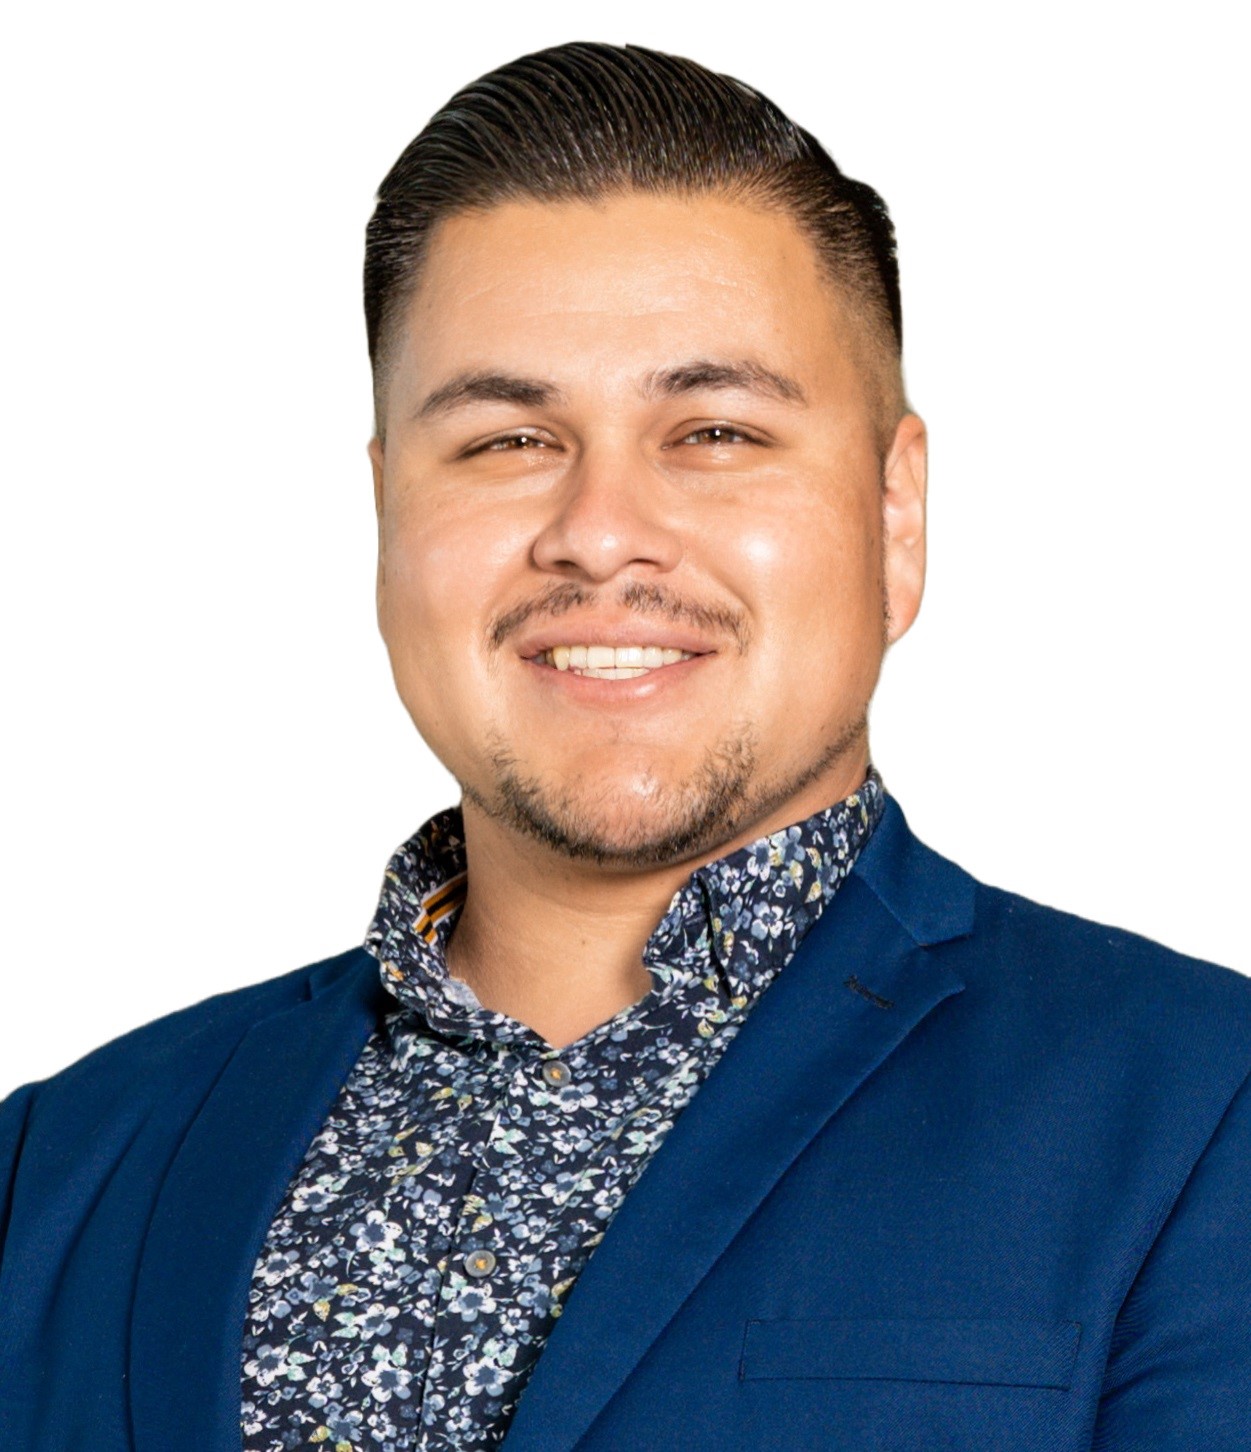 Rudy is the Director of Strategic Initiatives at Price Philanthropies. His experience working in the local and federal government, including the office of then Senator Kamal Harris, connects community efforts and policy priorities. He joined the Aaron Price Fellows Program in 2021.